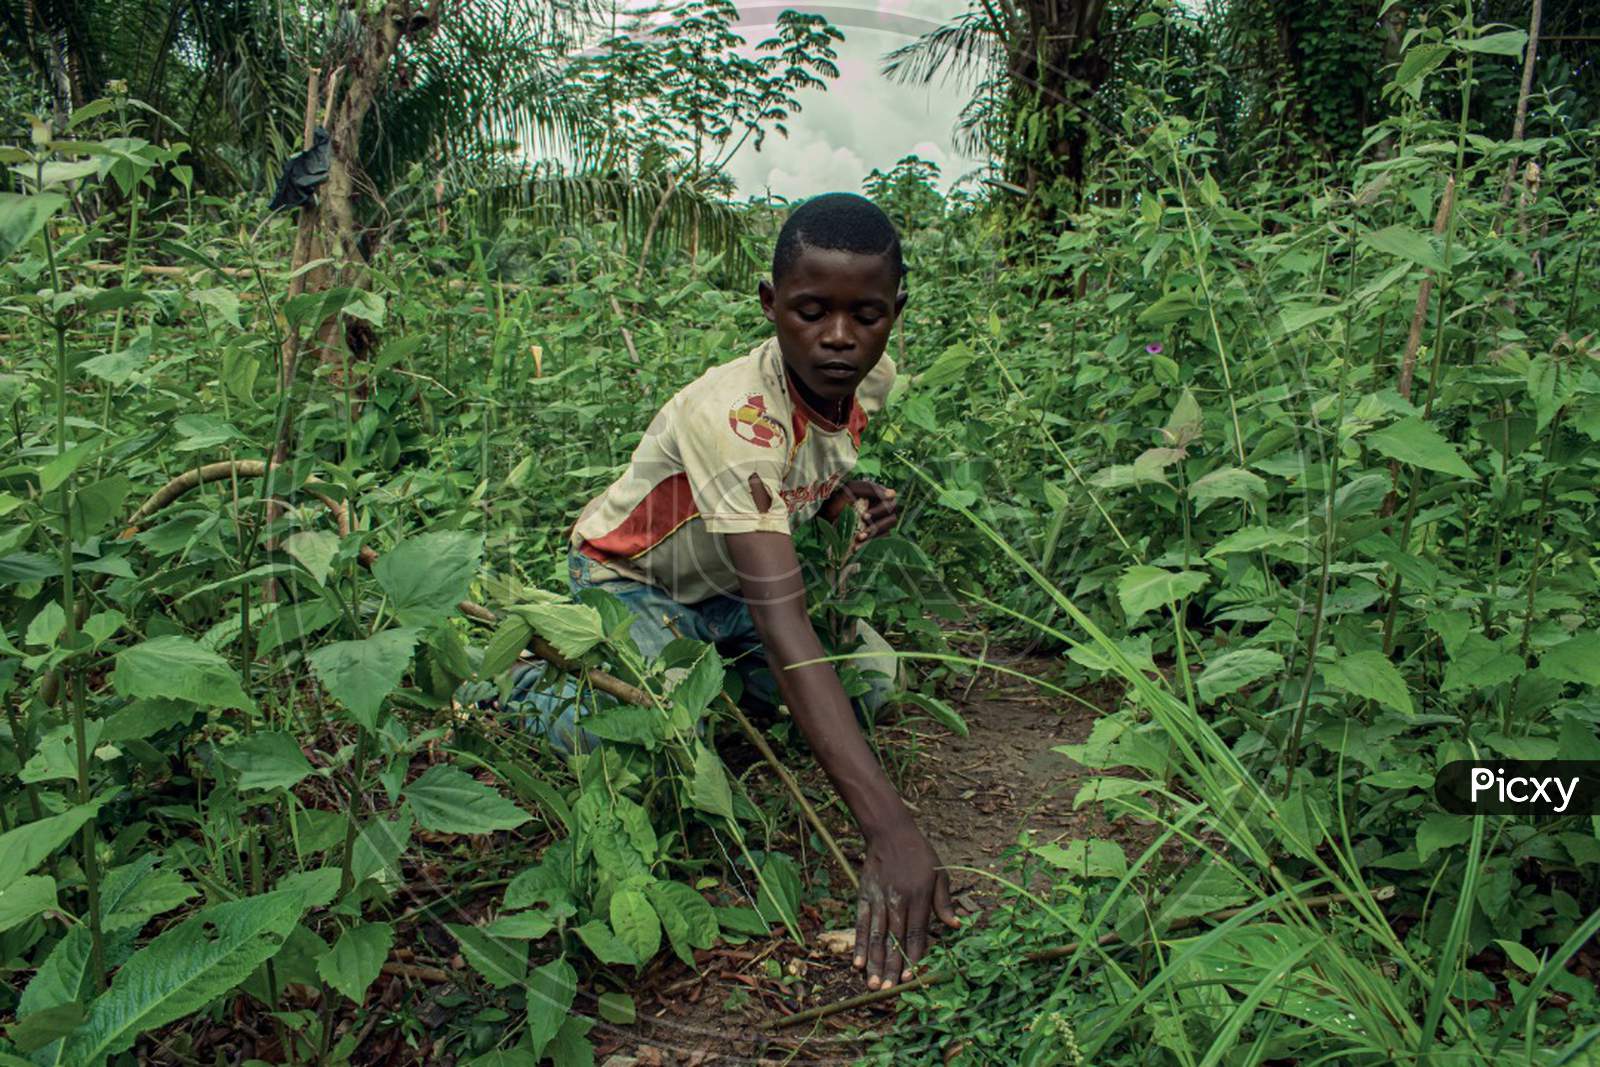 A Pygmy from East of Cameroon setting up a trap for rat mole, or porcupine, Little boy in a bush